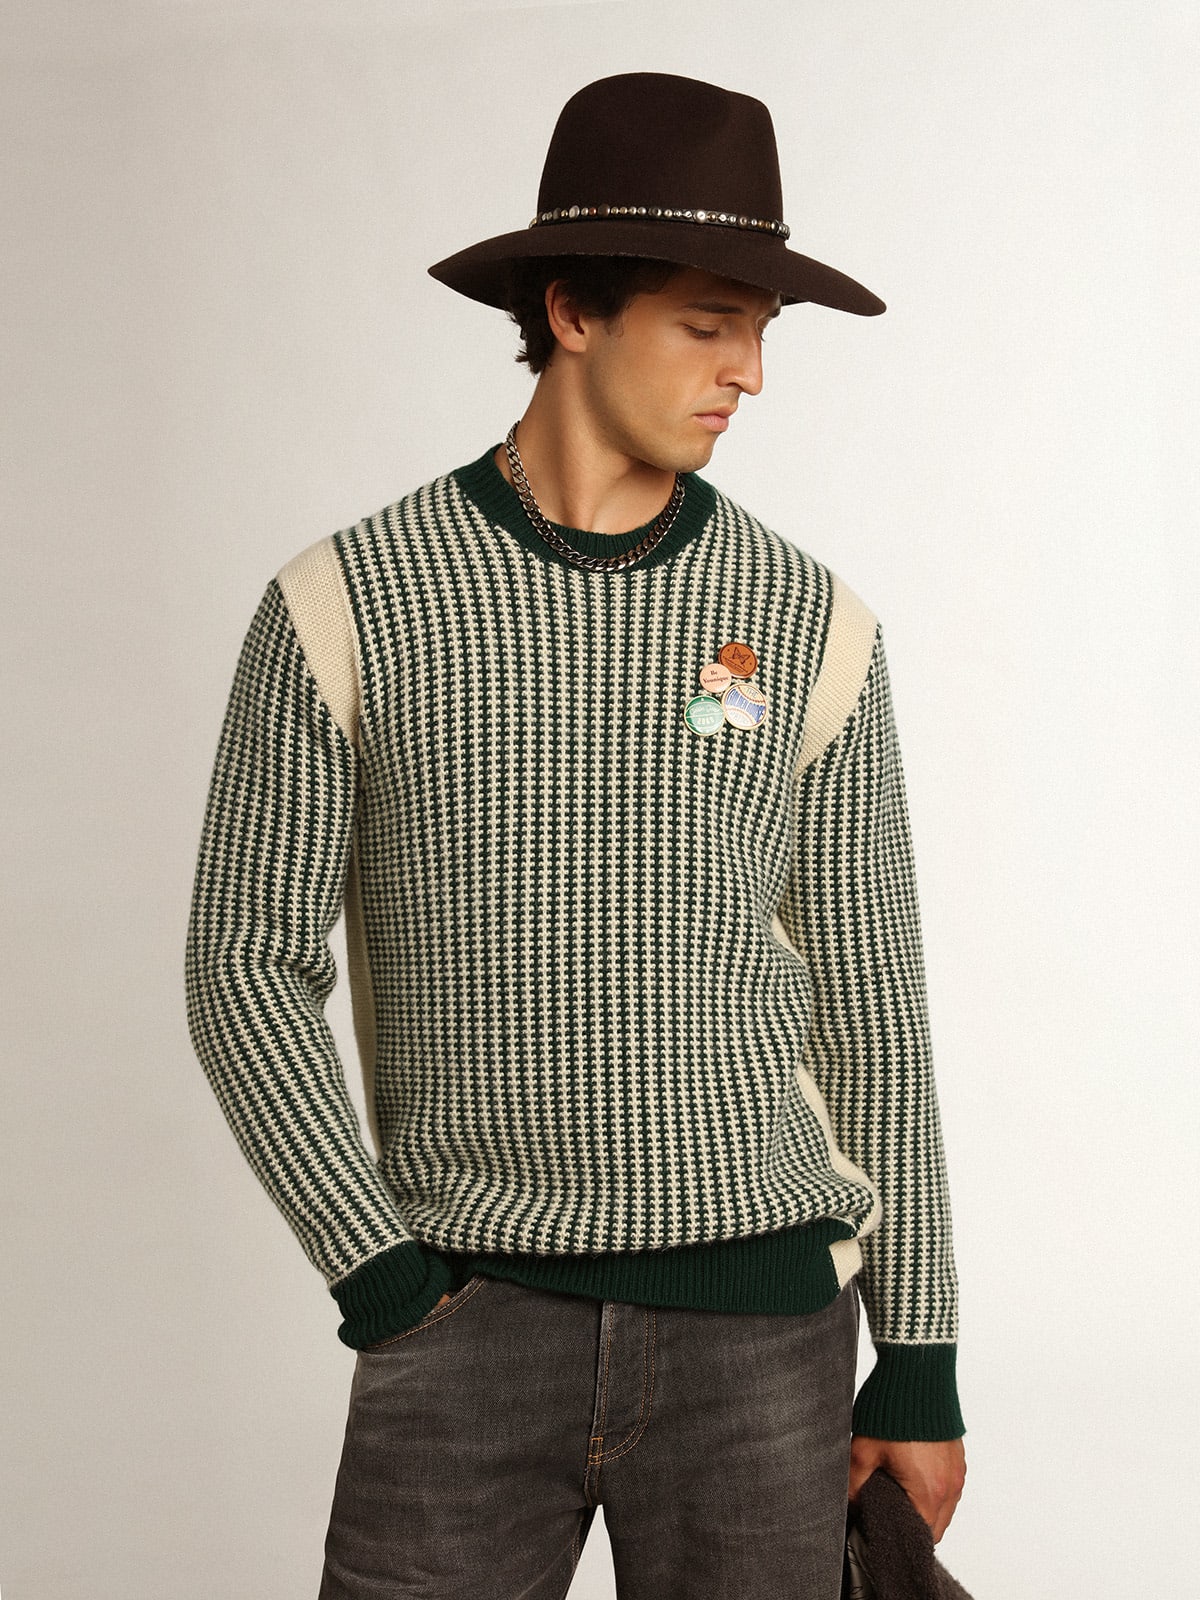 Golden Goose - Men's round-neck sweater in two-tone white and green wool in 